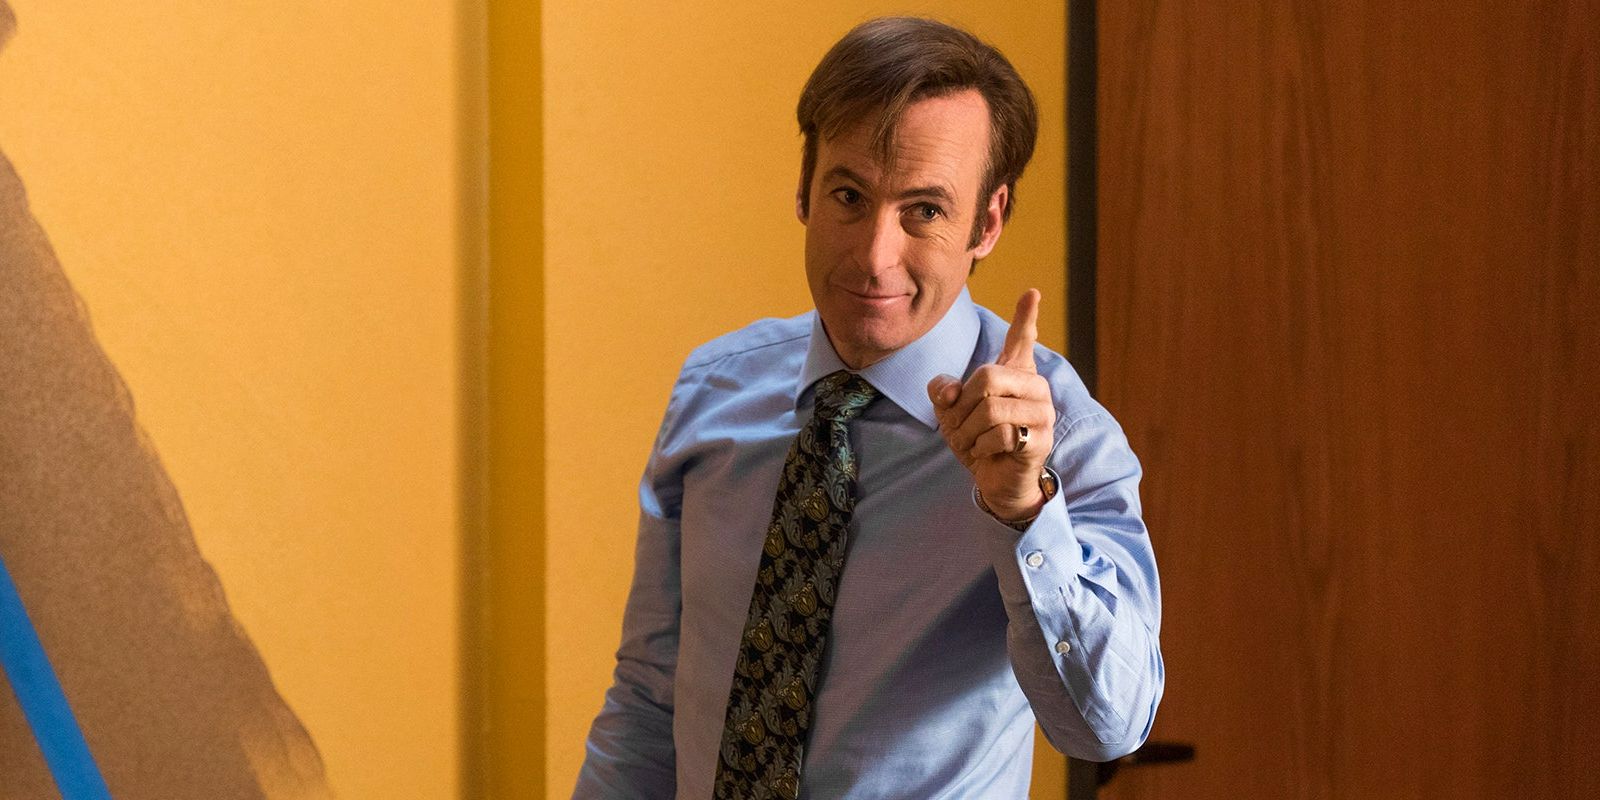 Bob Odenkirk as Saul Goodman pointing and smiling in Better Call Saul